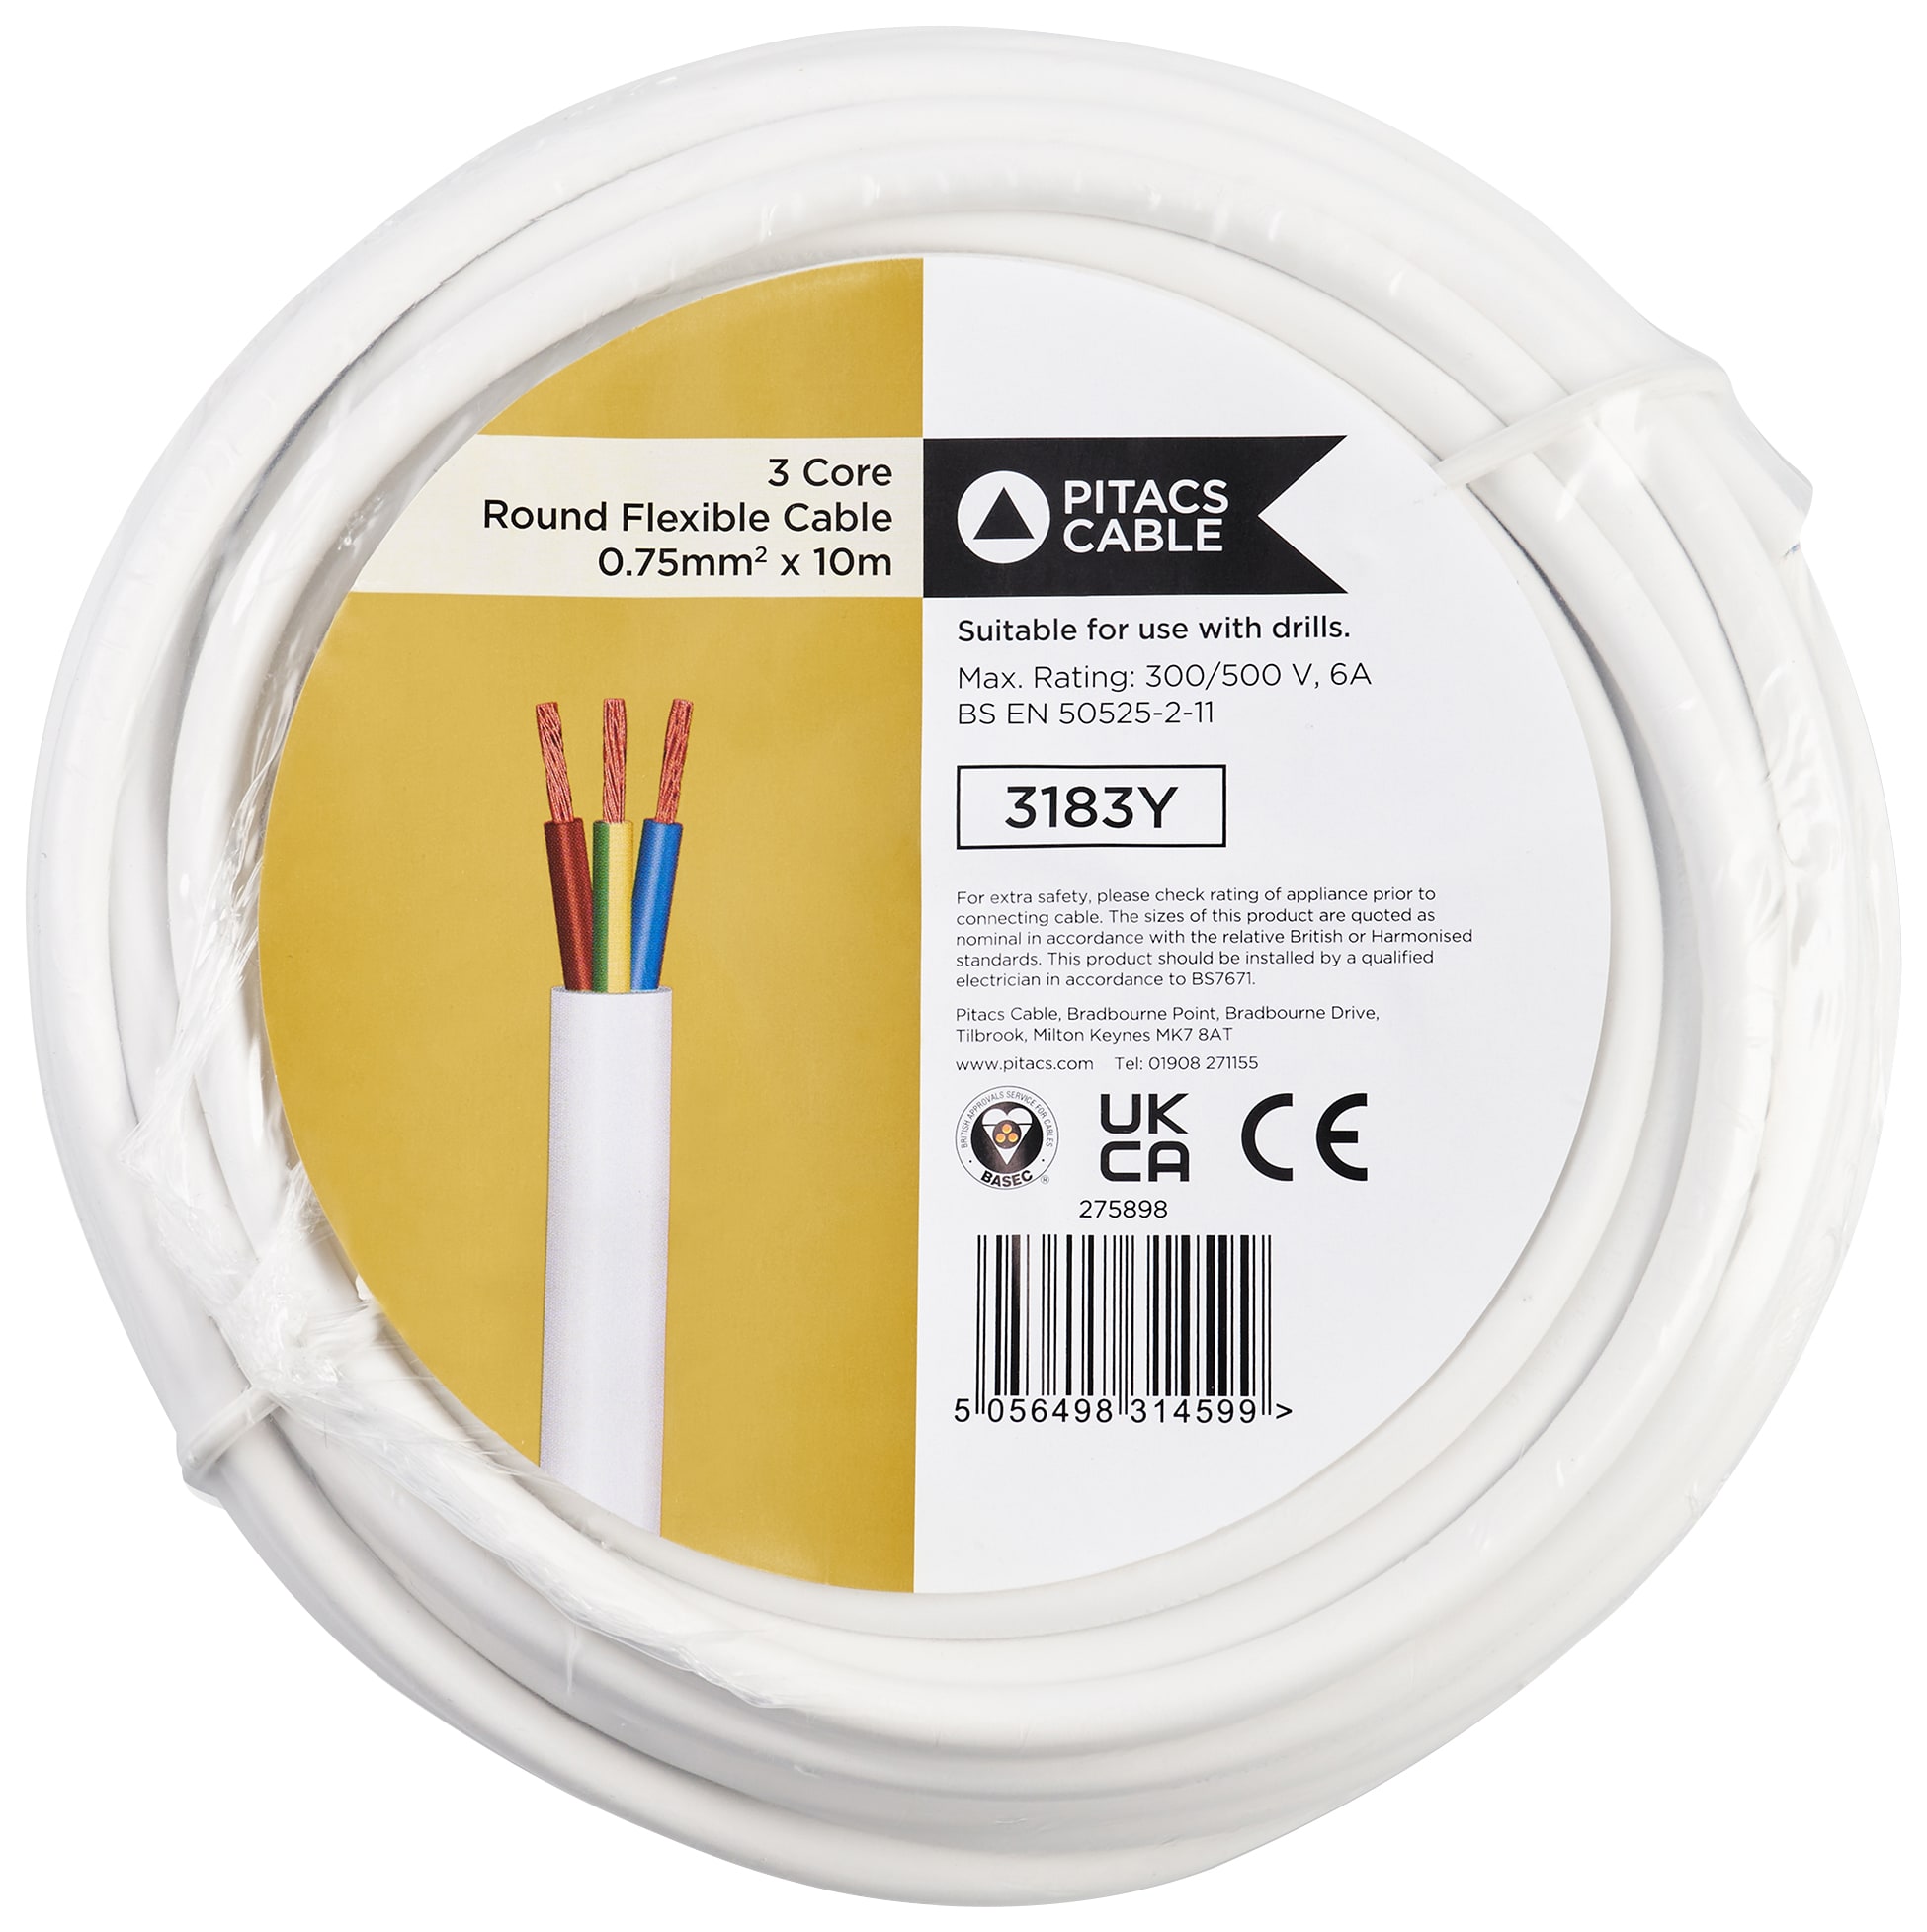 Pitacs 3 Core 3183Y White Round Flexible Cable